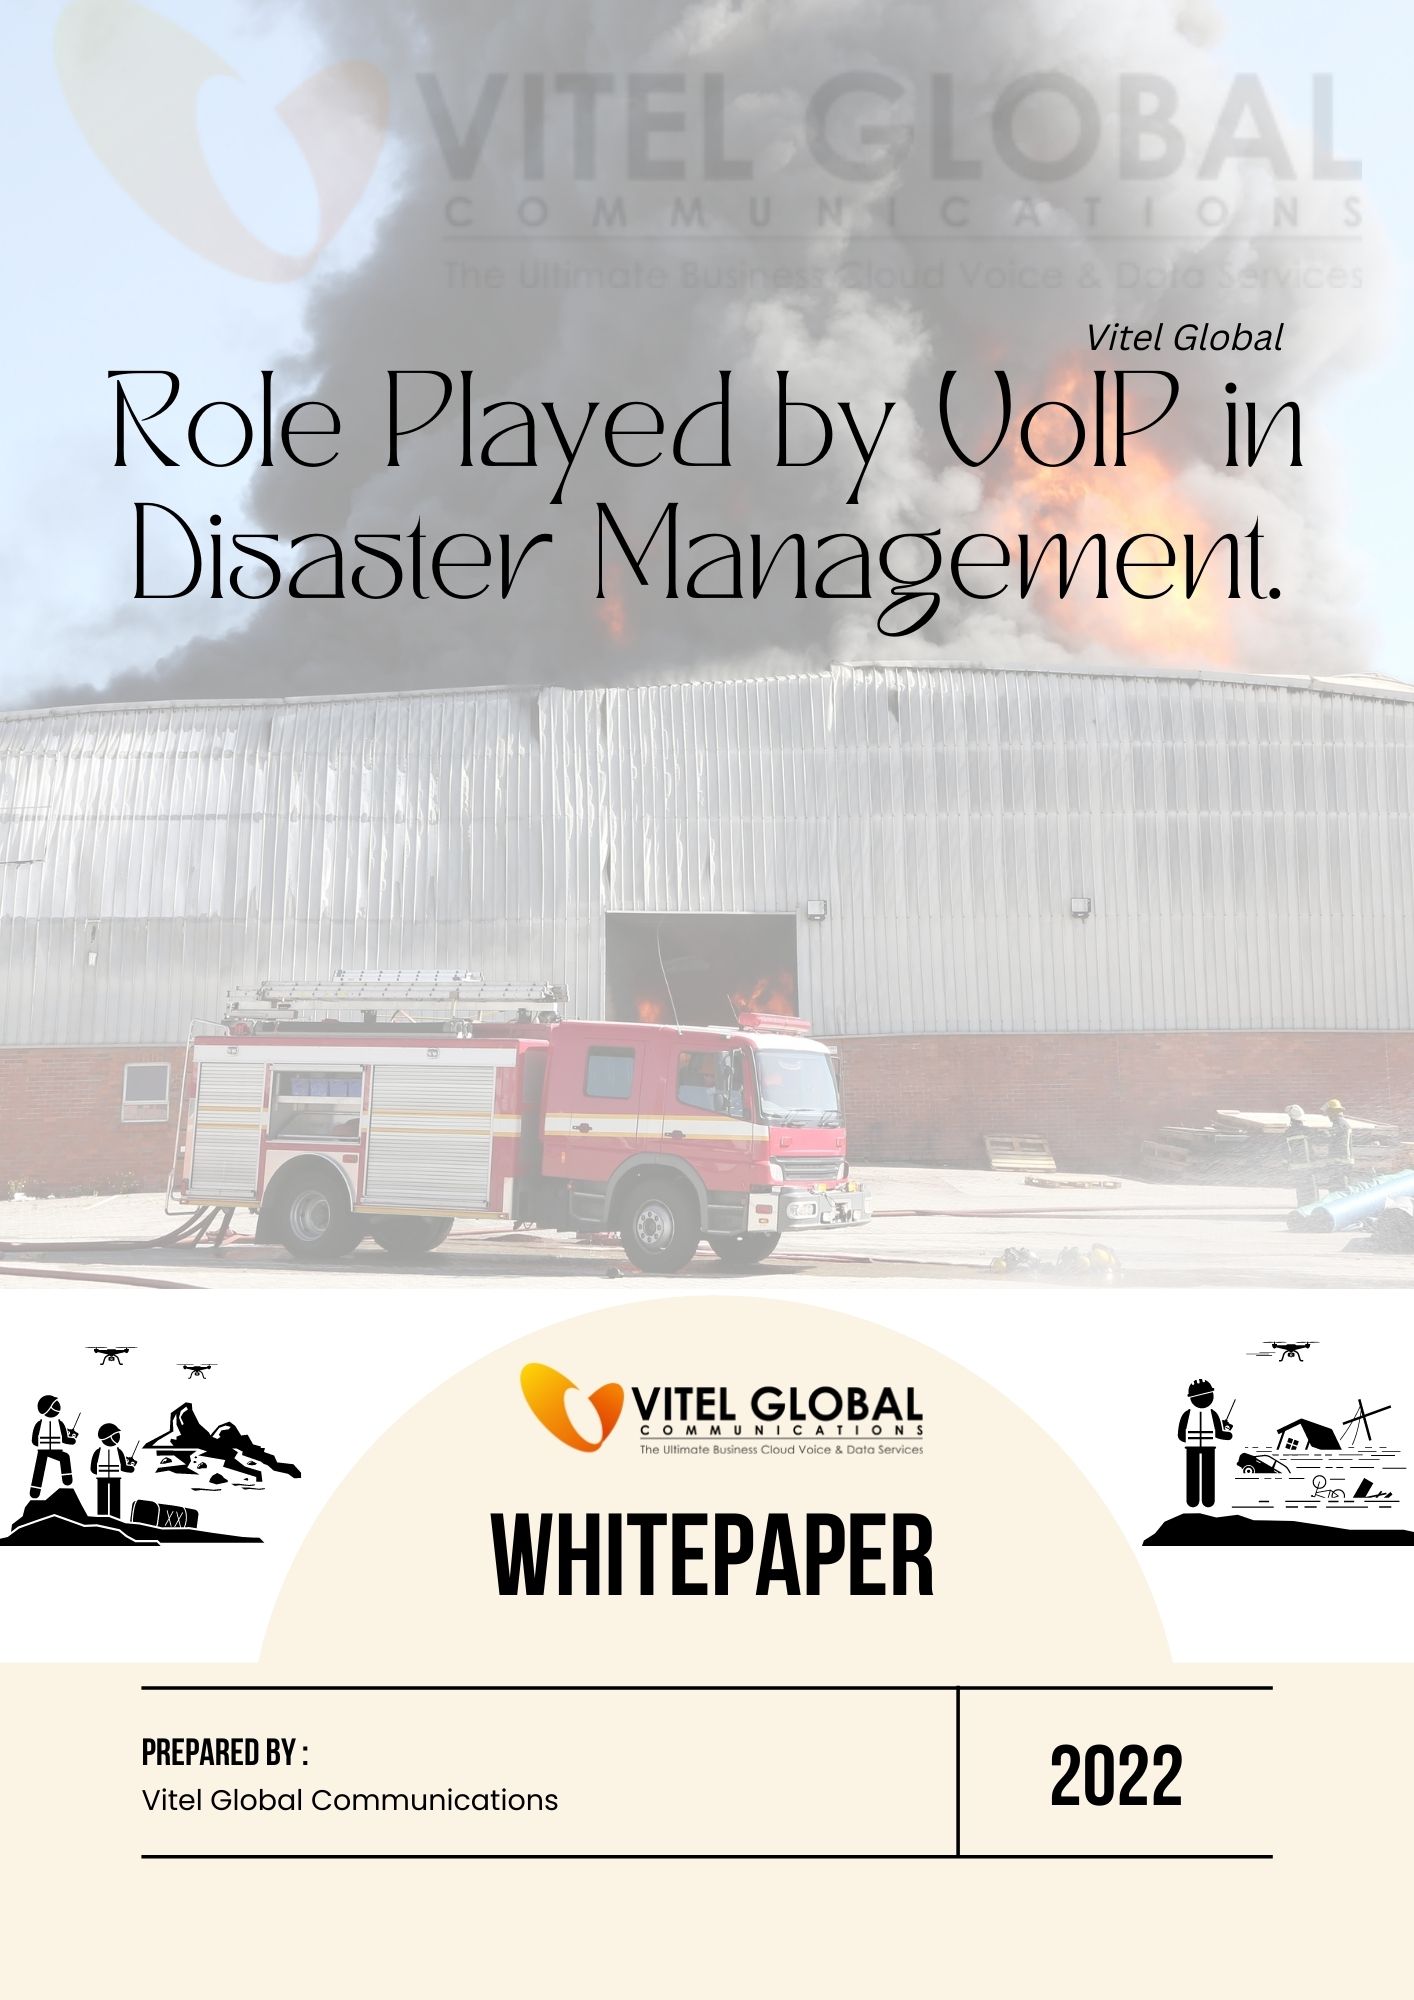 VoIP in Disaster Management